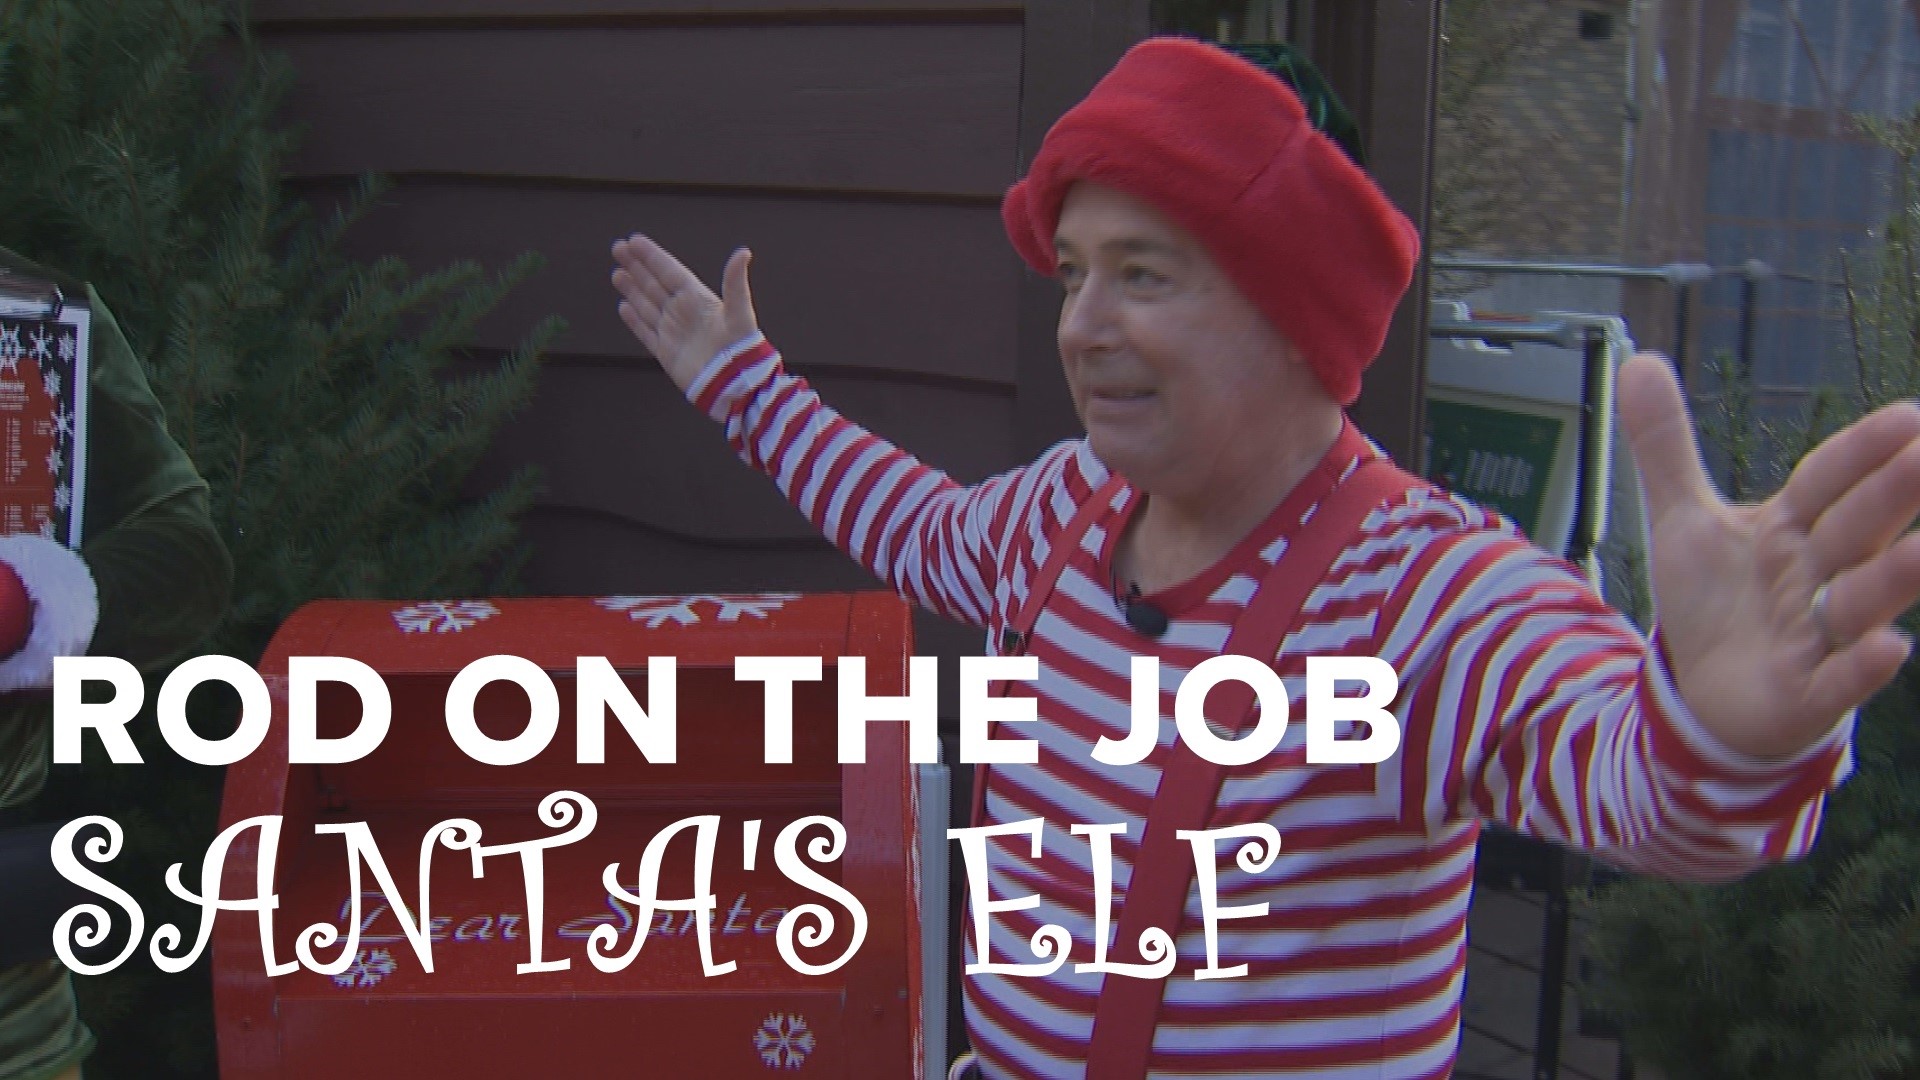 KGW meteorologist Rod Hill took a turn at being an elf for the Santa at Bridgeport Village.